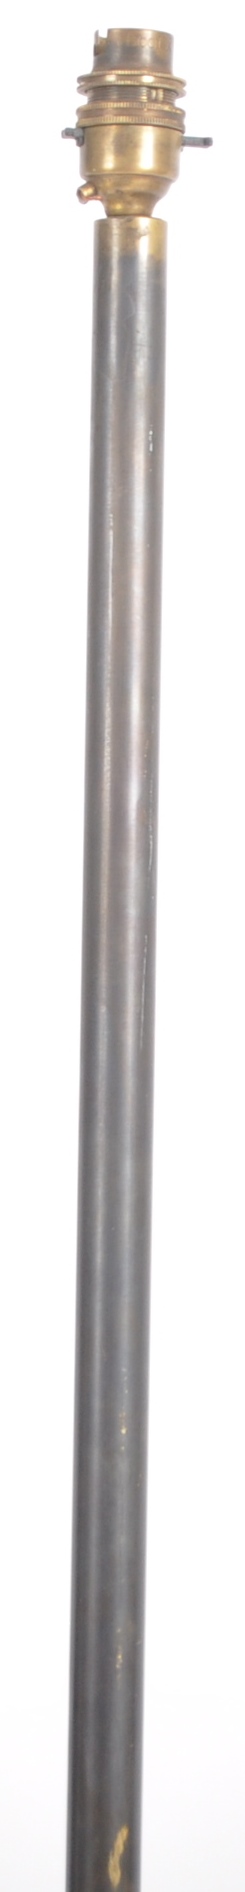 EARLY 20TH CENTURY FAUX MARBLE COLUMN STANDARD LAMP - Image 6 of 6